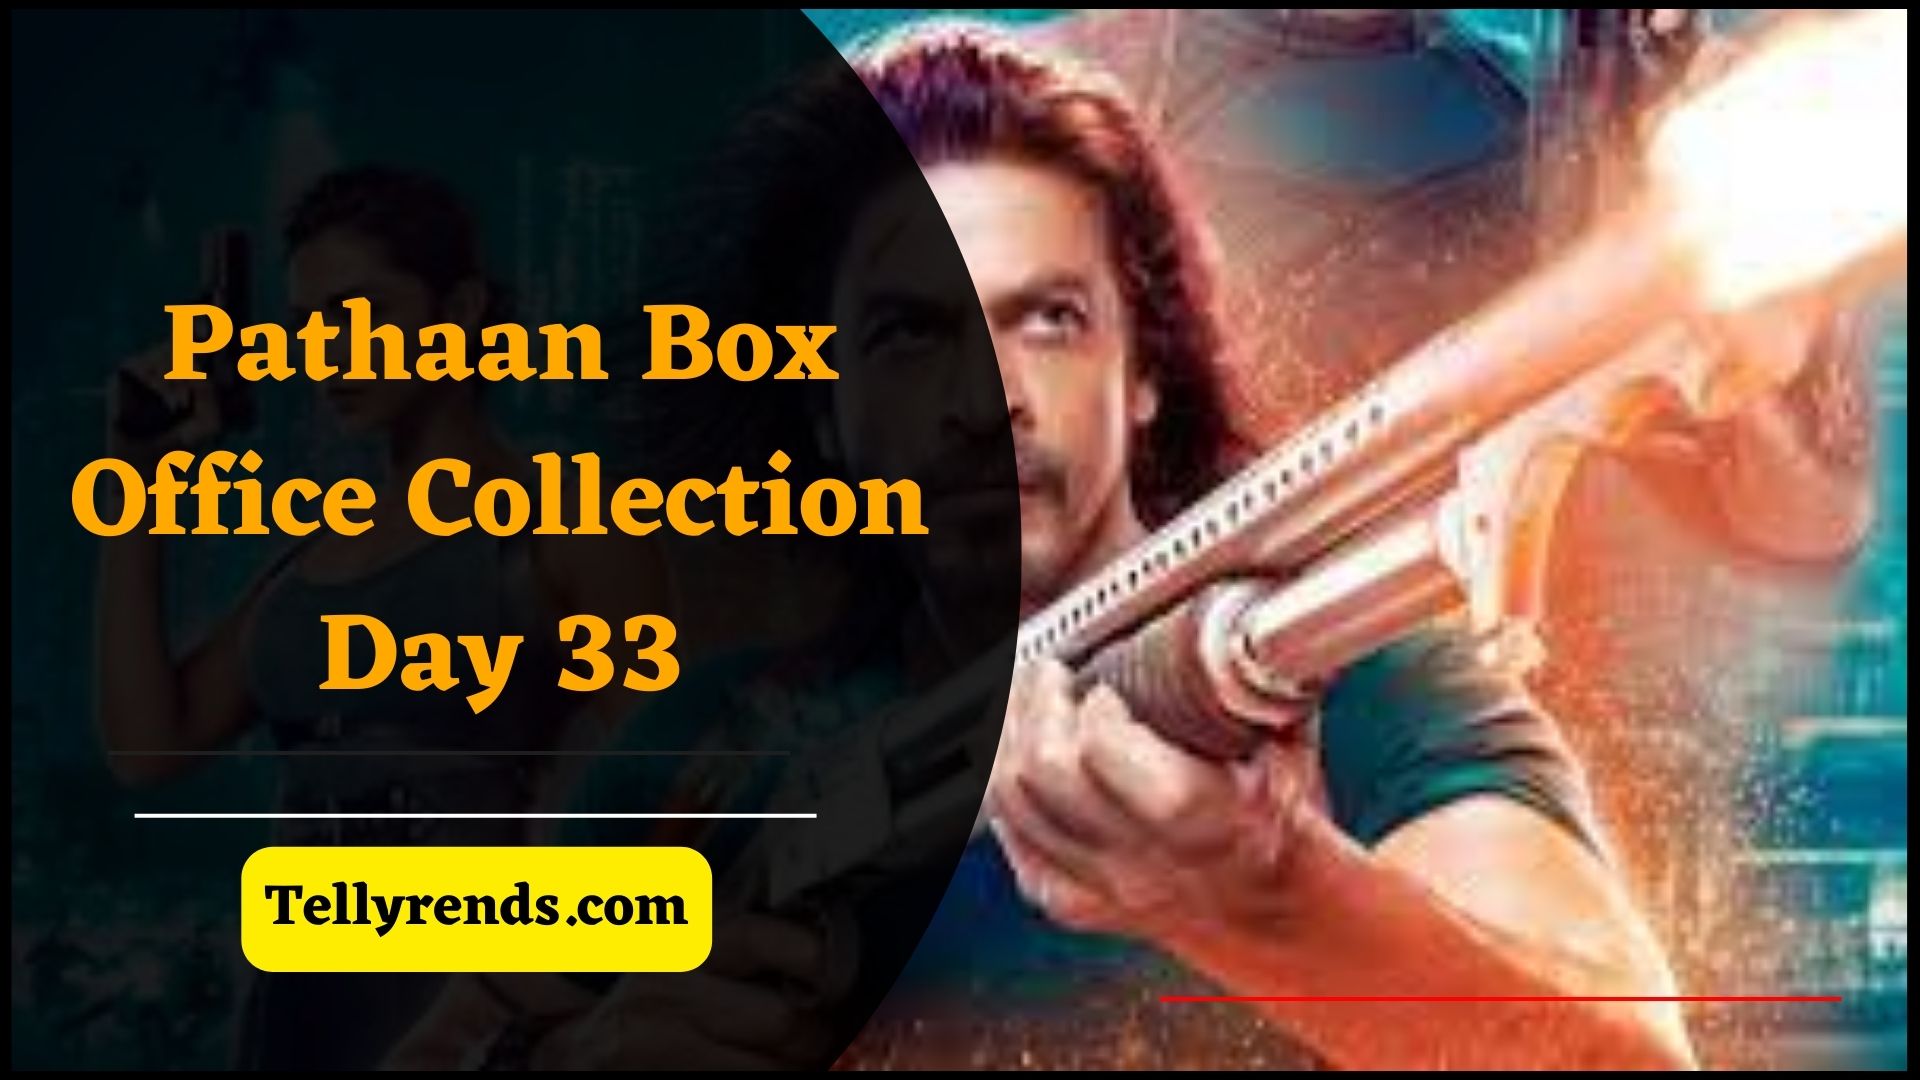 Pathaan Box Office Collection Day 33